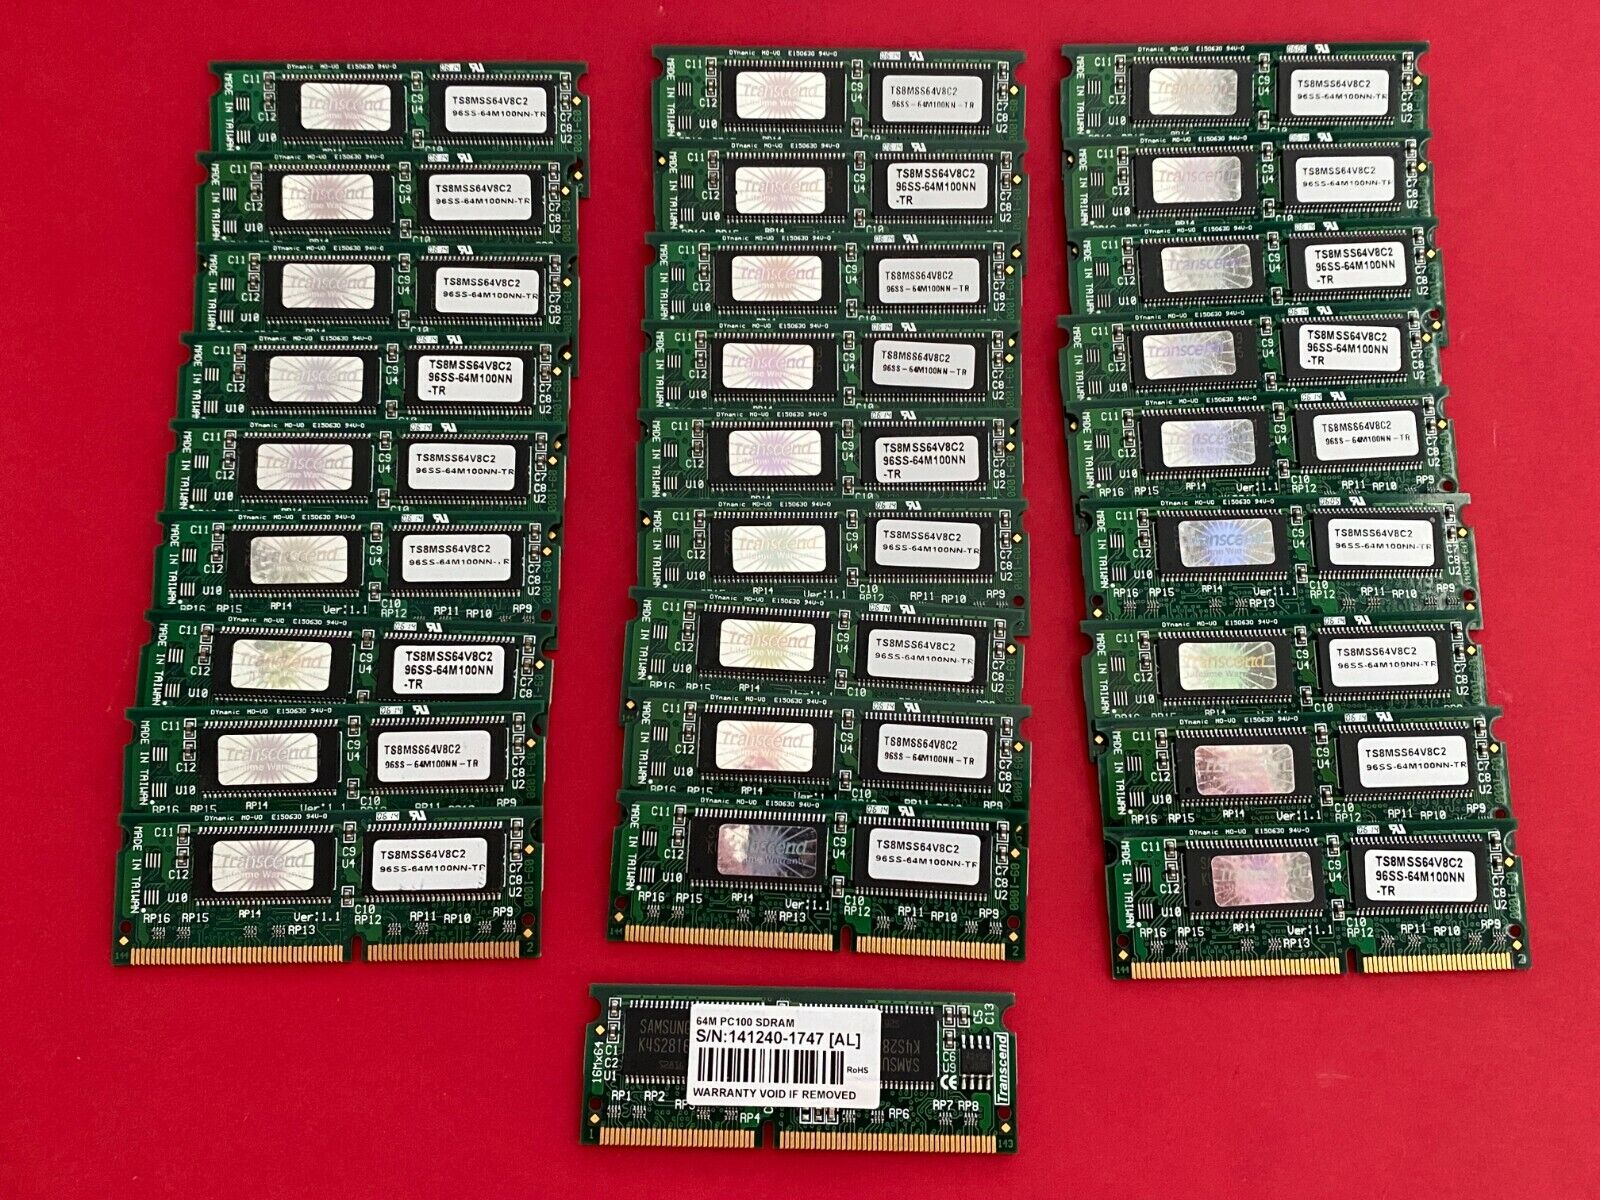 Transcend TS8MSS64V8C2 144PIN PC100 Unbuffered DIMM 64MB With 8Mx16 CL2, 2pc Lot